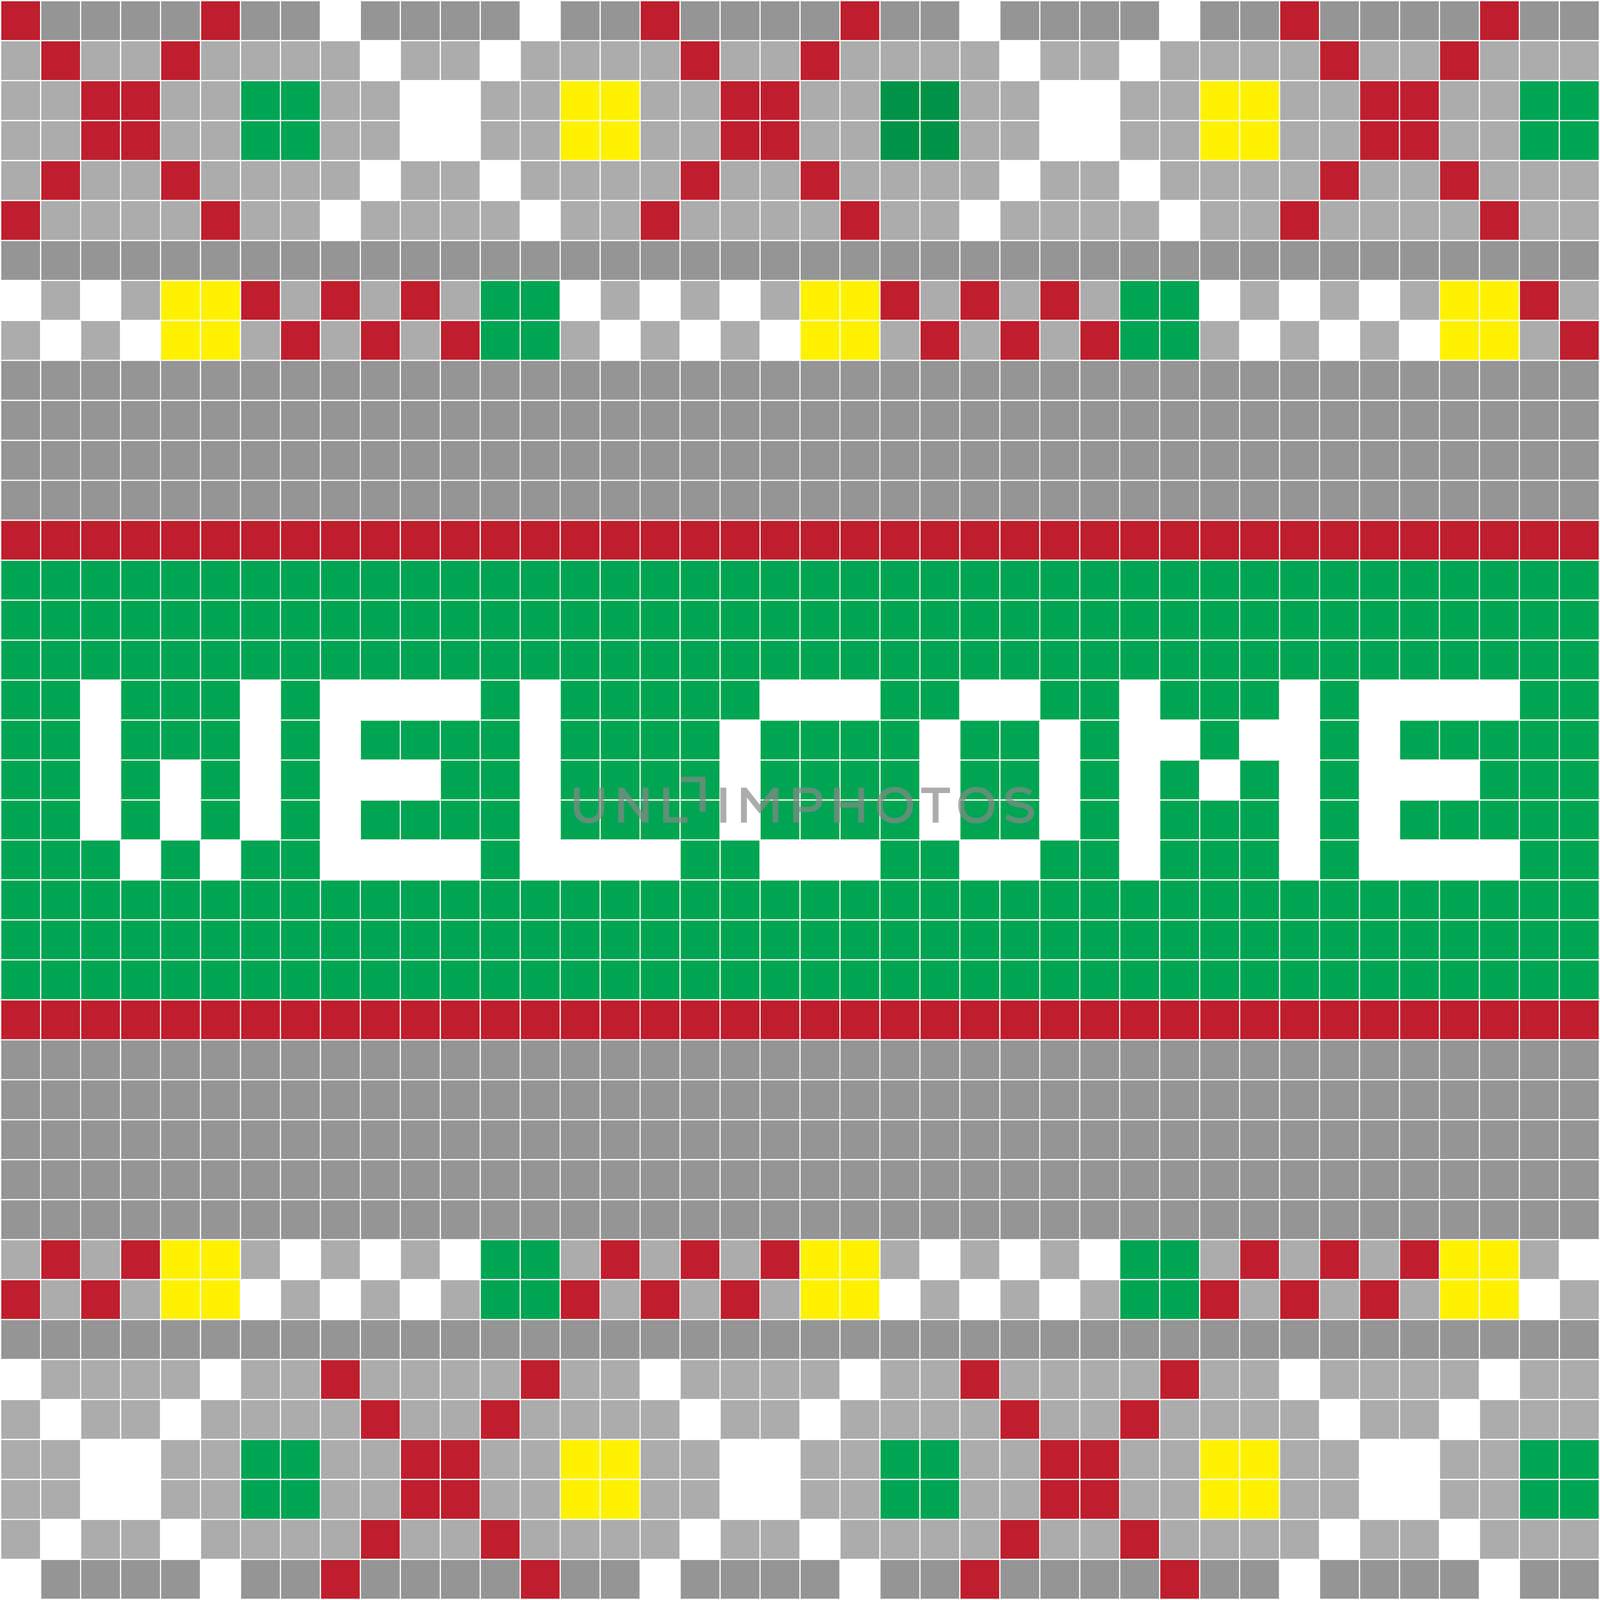 Welcome pixel banner, illustration of a scoreboard composition with text and geometric traditional motif